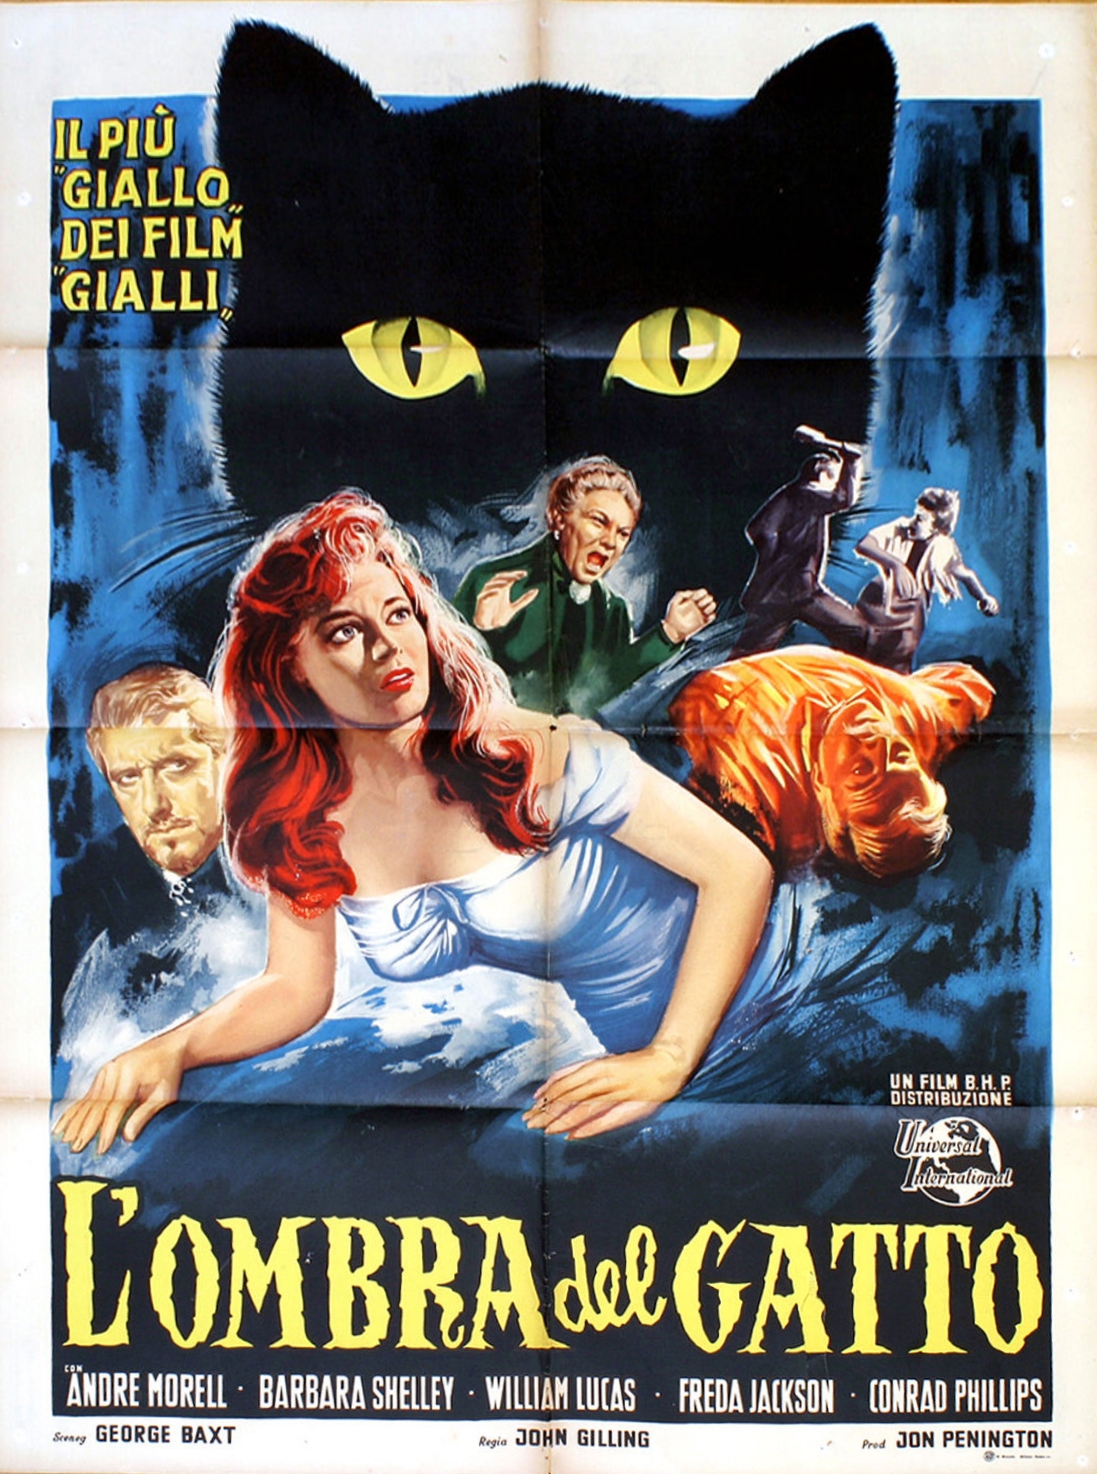 THE SHADOW OF THE CAT (1961)